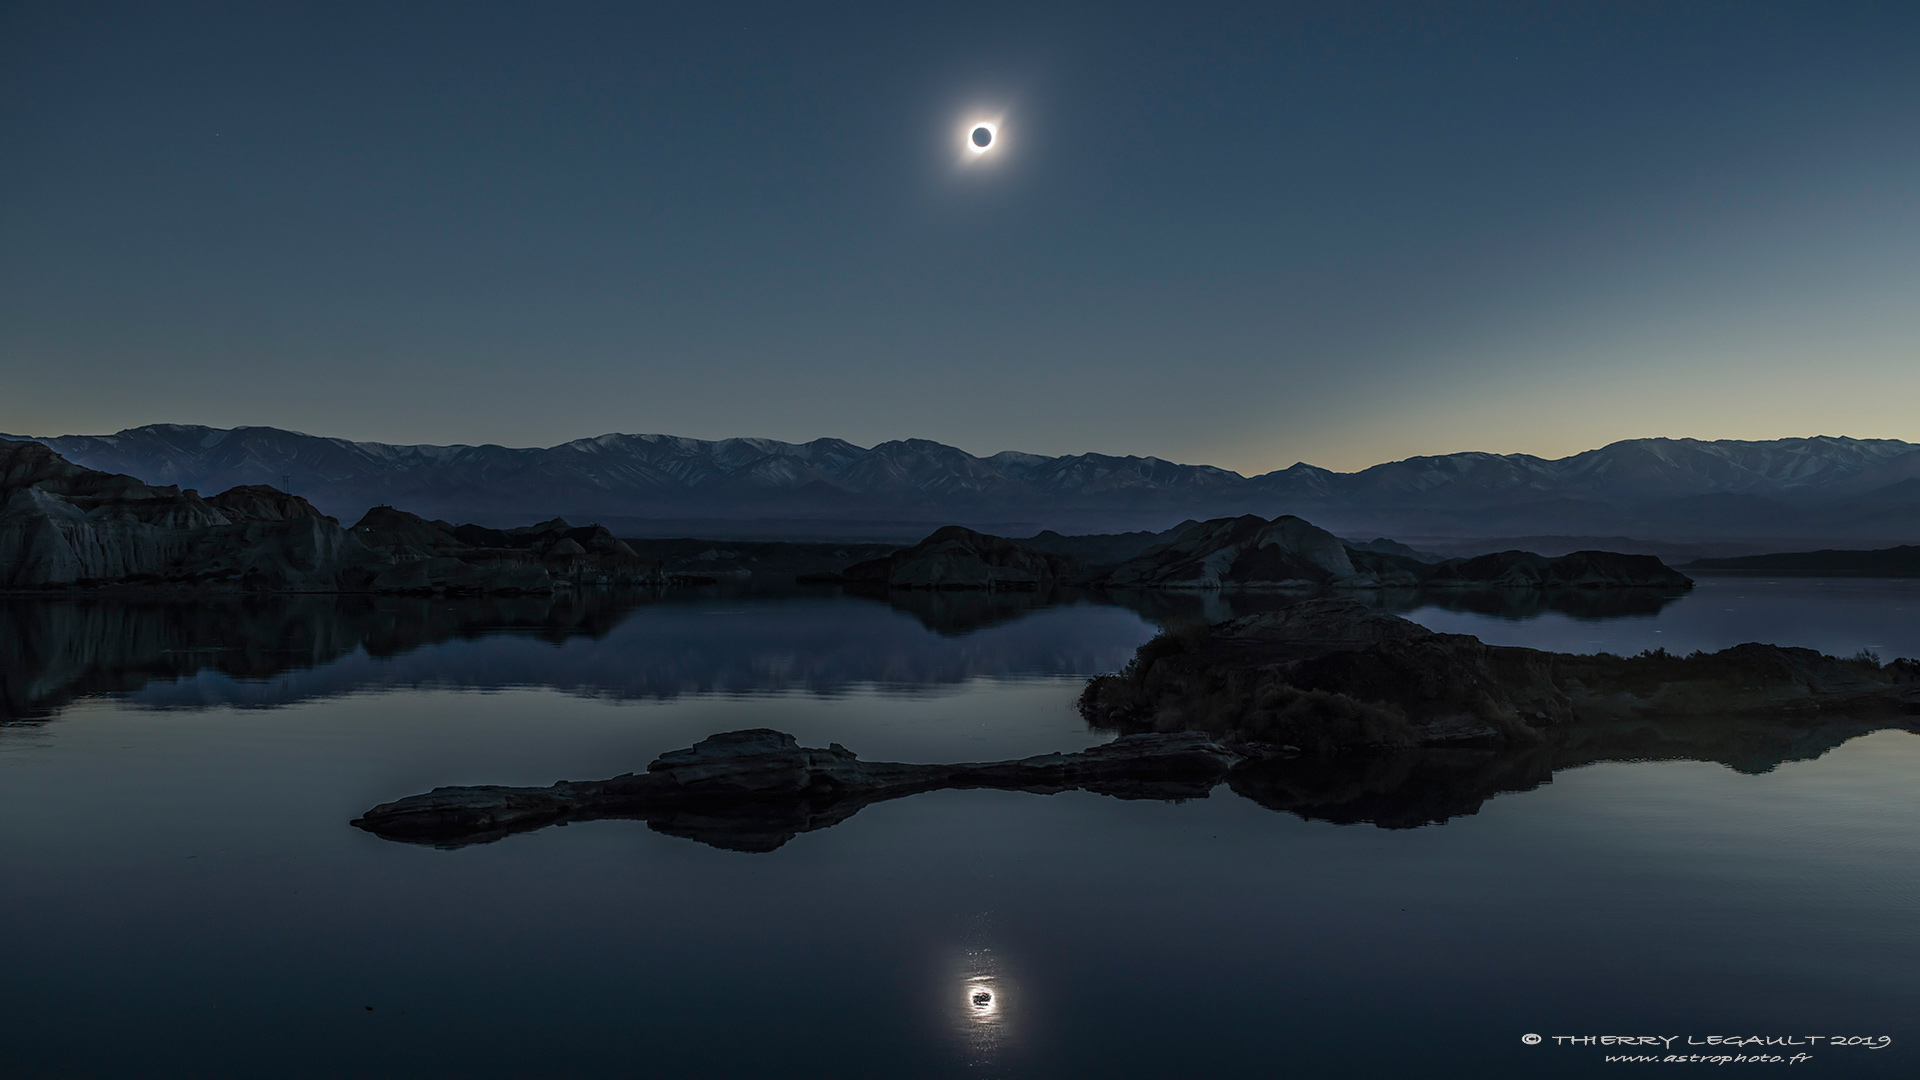 APOD: 2019 August 5 - A Total Solar Eclipse Reflected